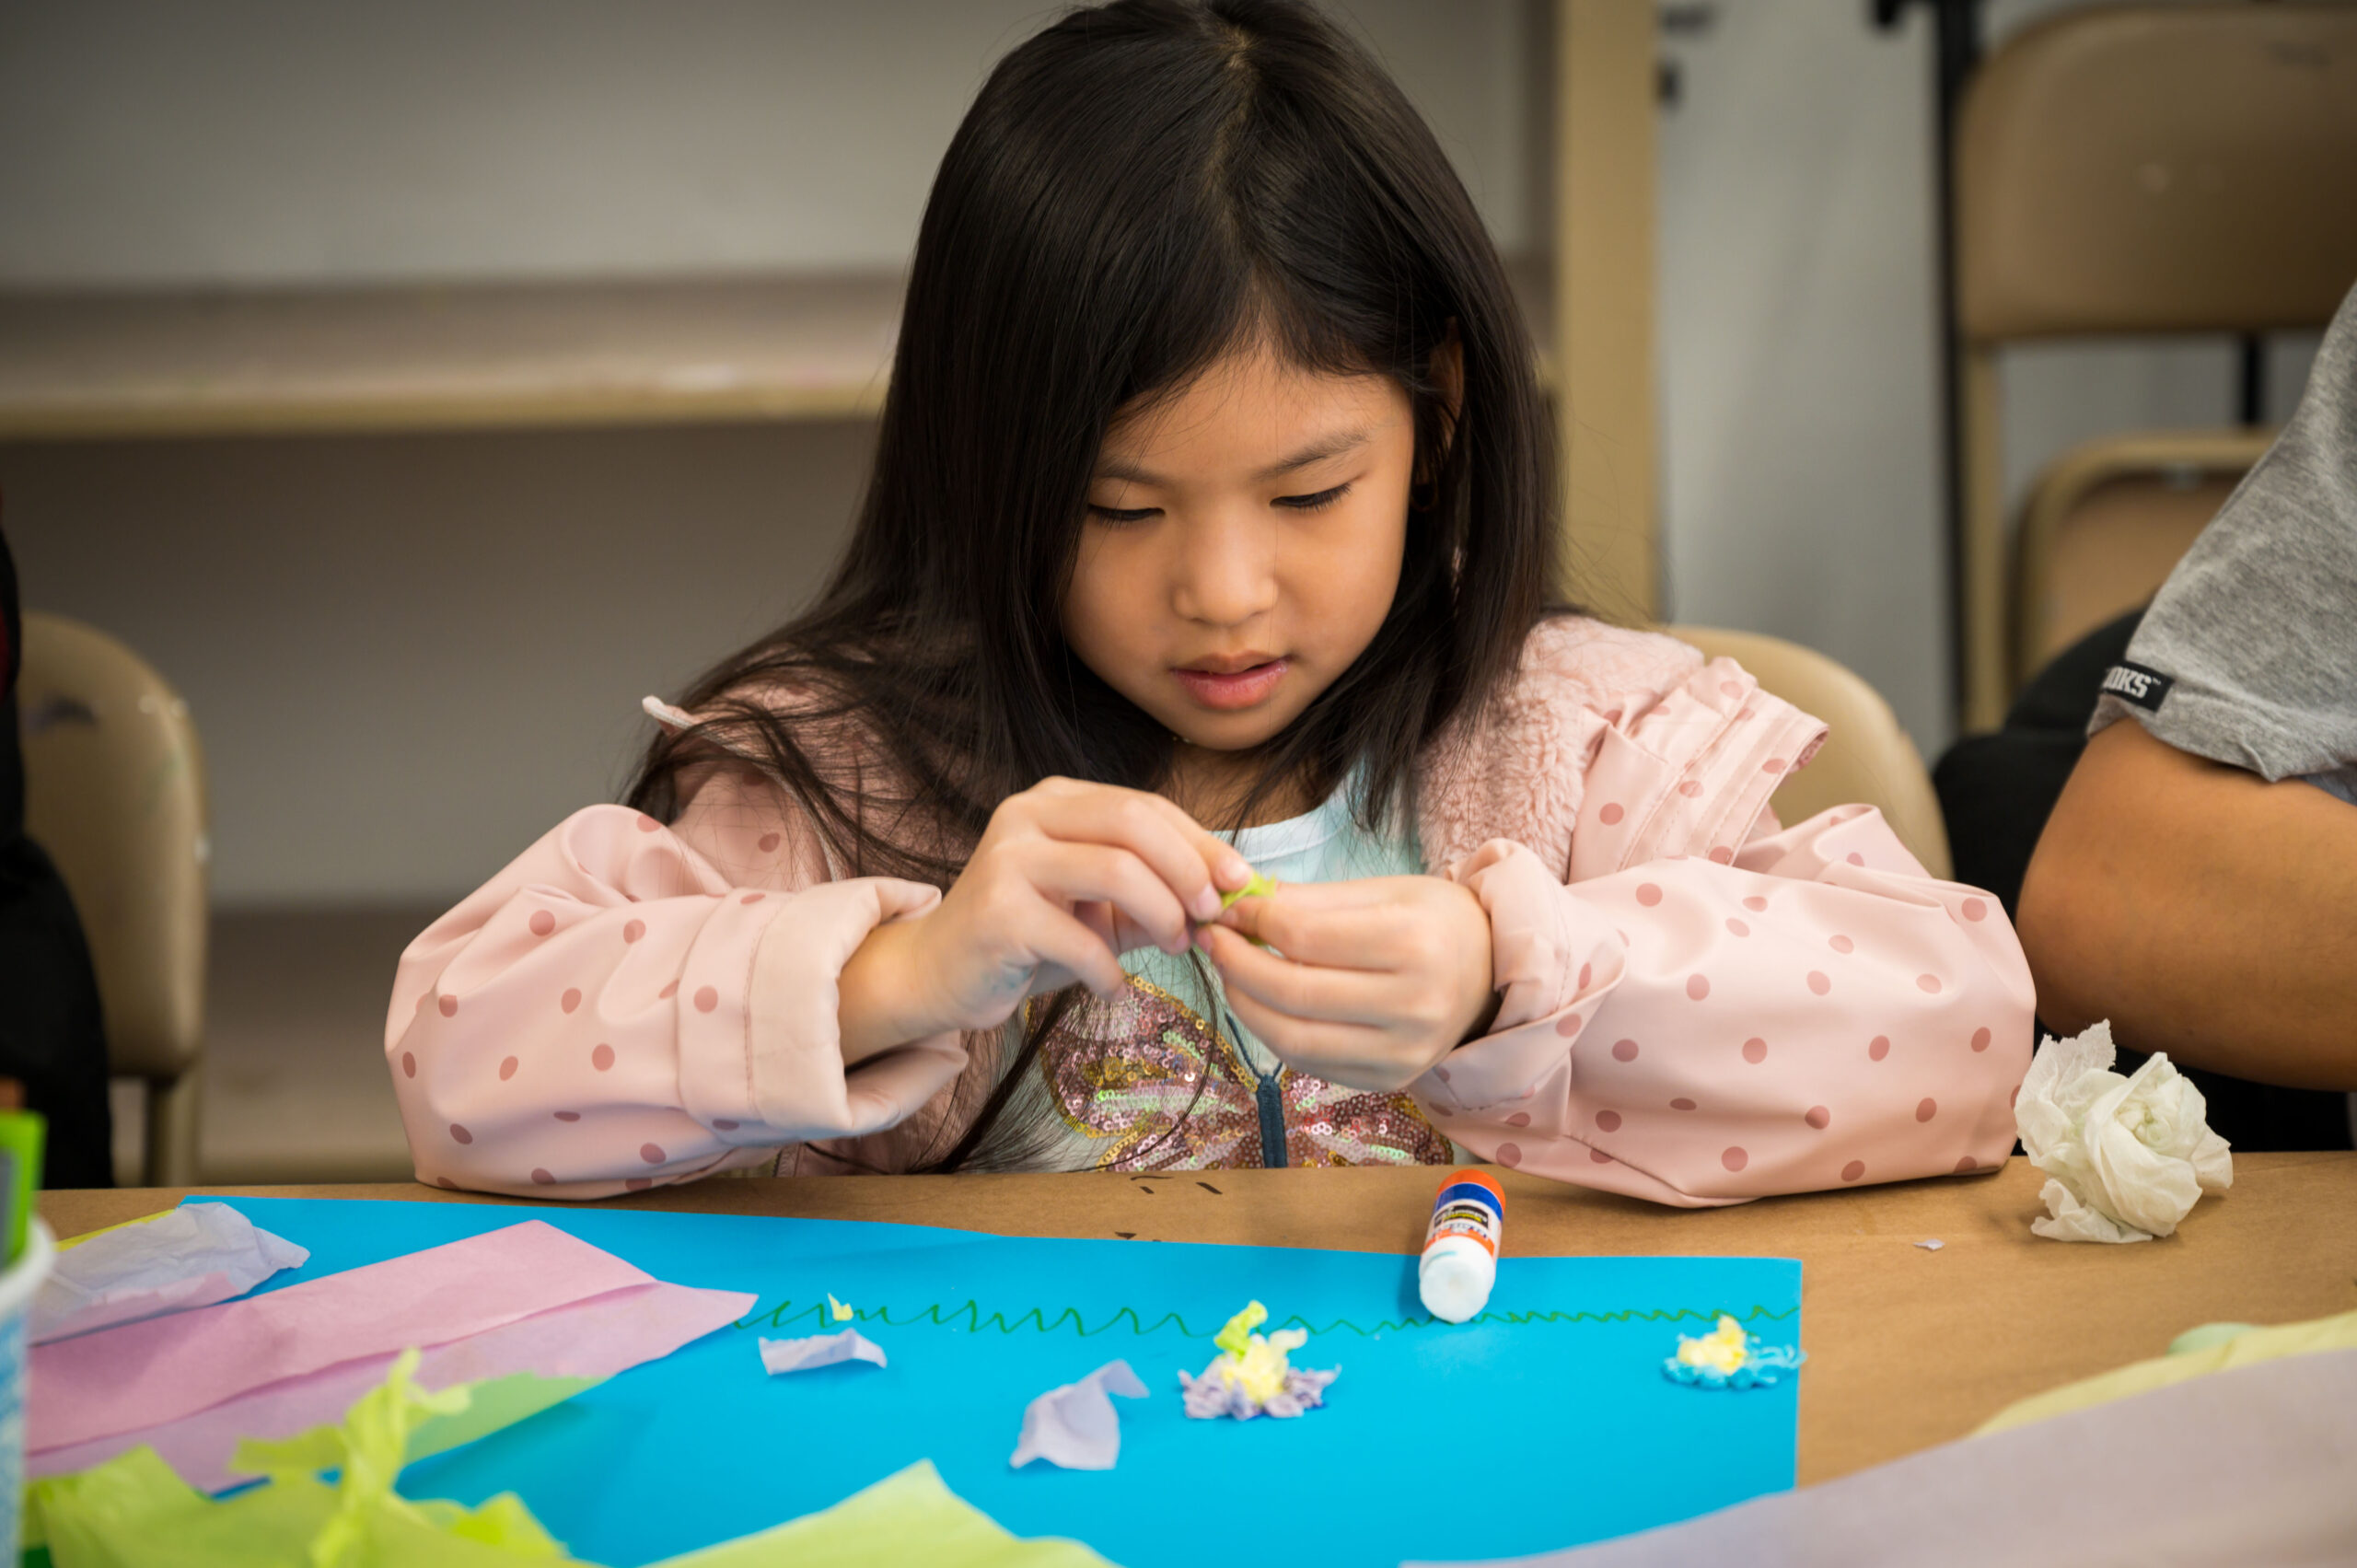 A girl sitting at a table making art with colored paper